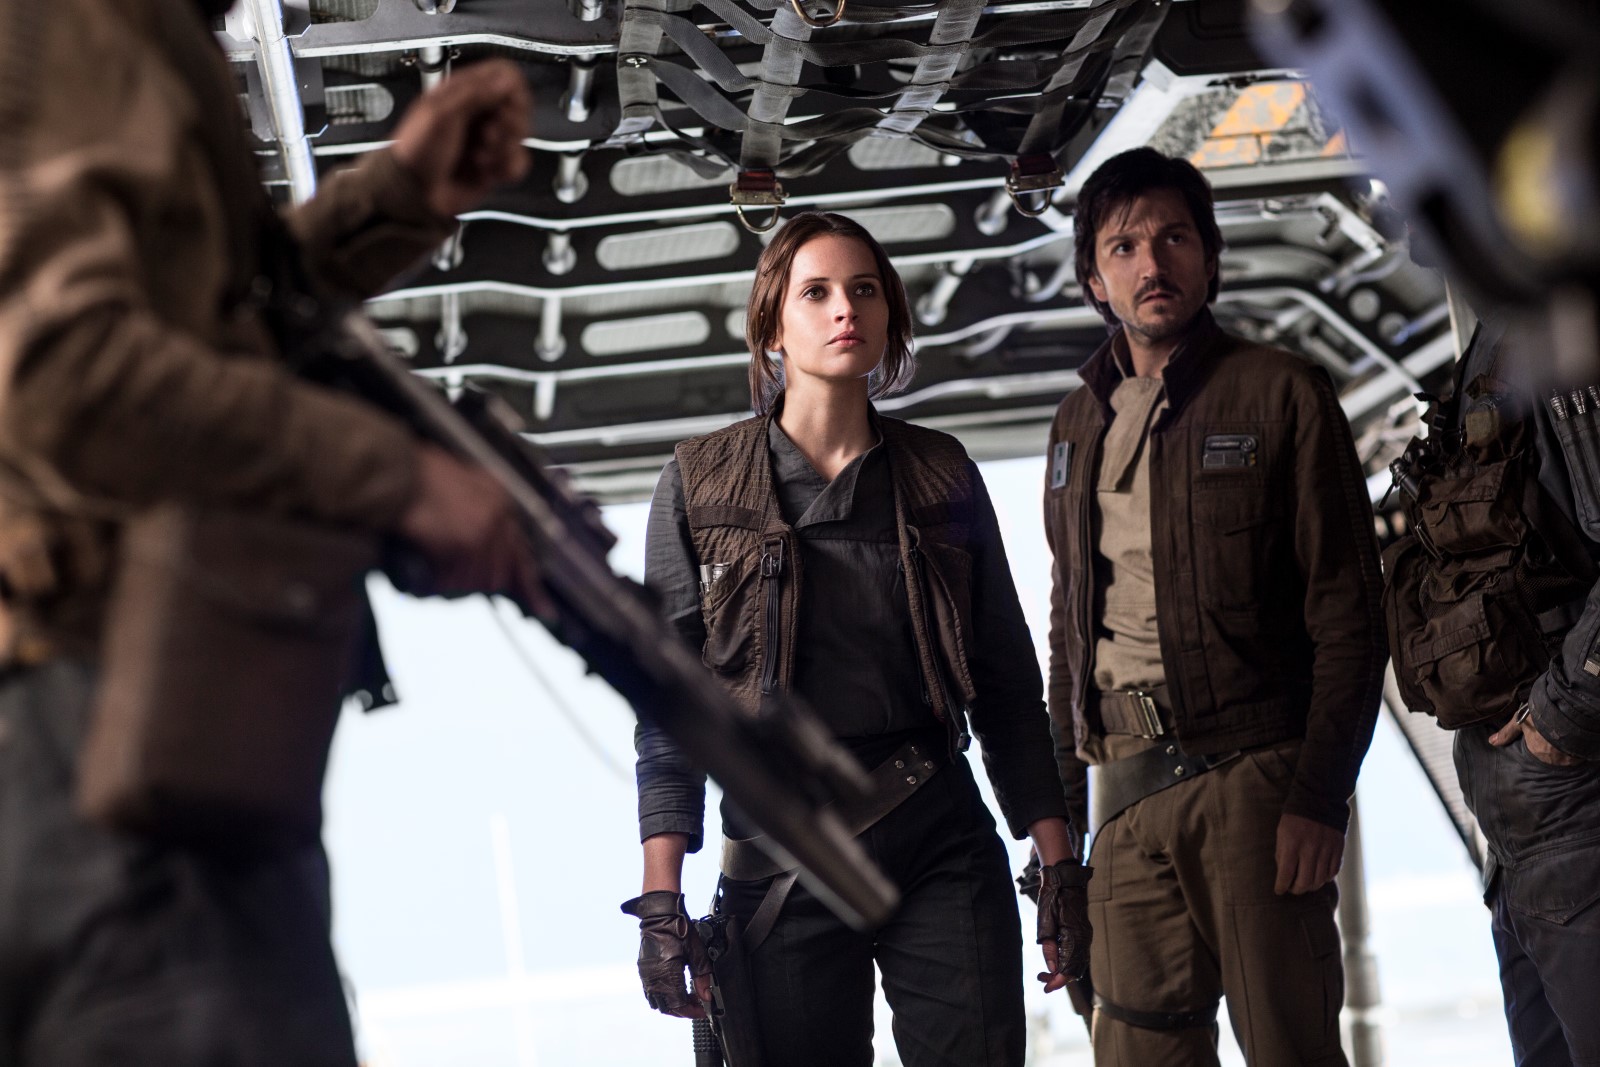 Rogue One: A Star Wars Story L to R: Jyn Erso (Felicity Jones) and Cassian Andor (Diego Luna) Ph: Jonathan Olley ©Lucasfilm LFL 2016.